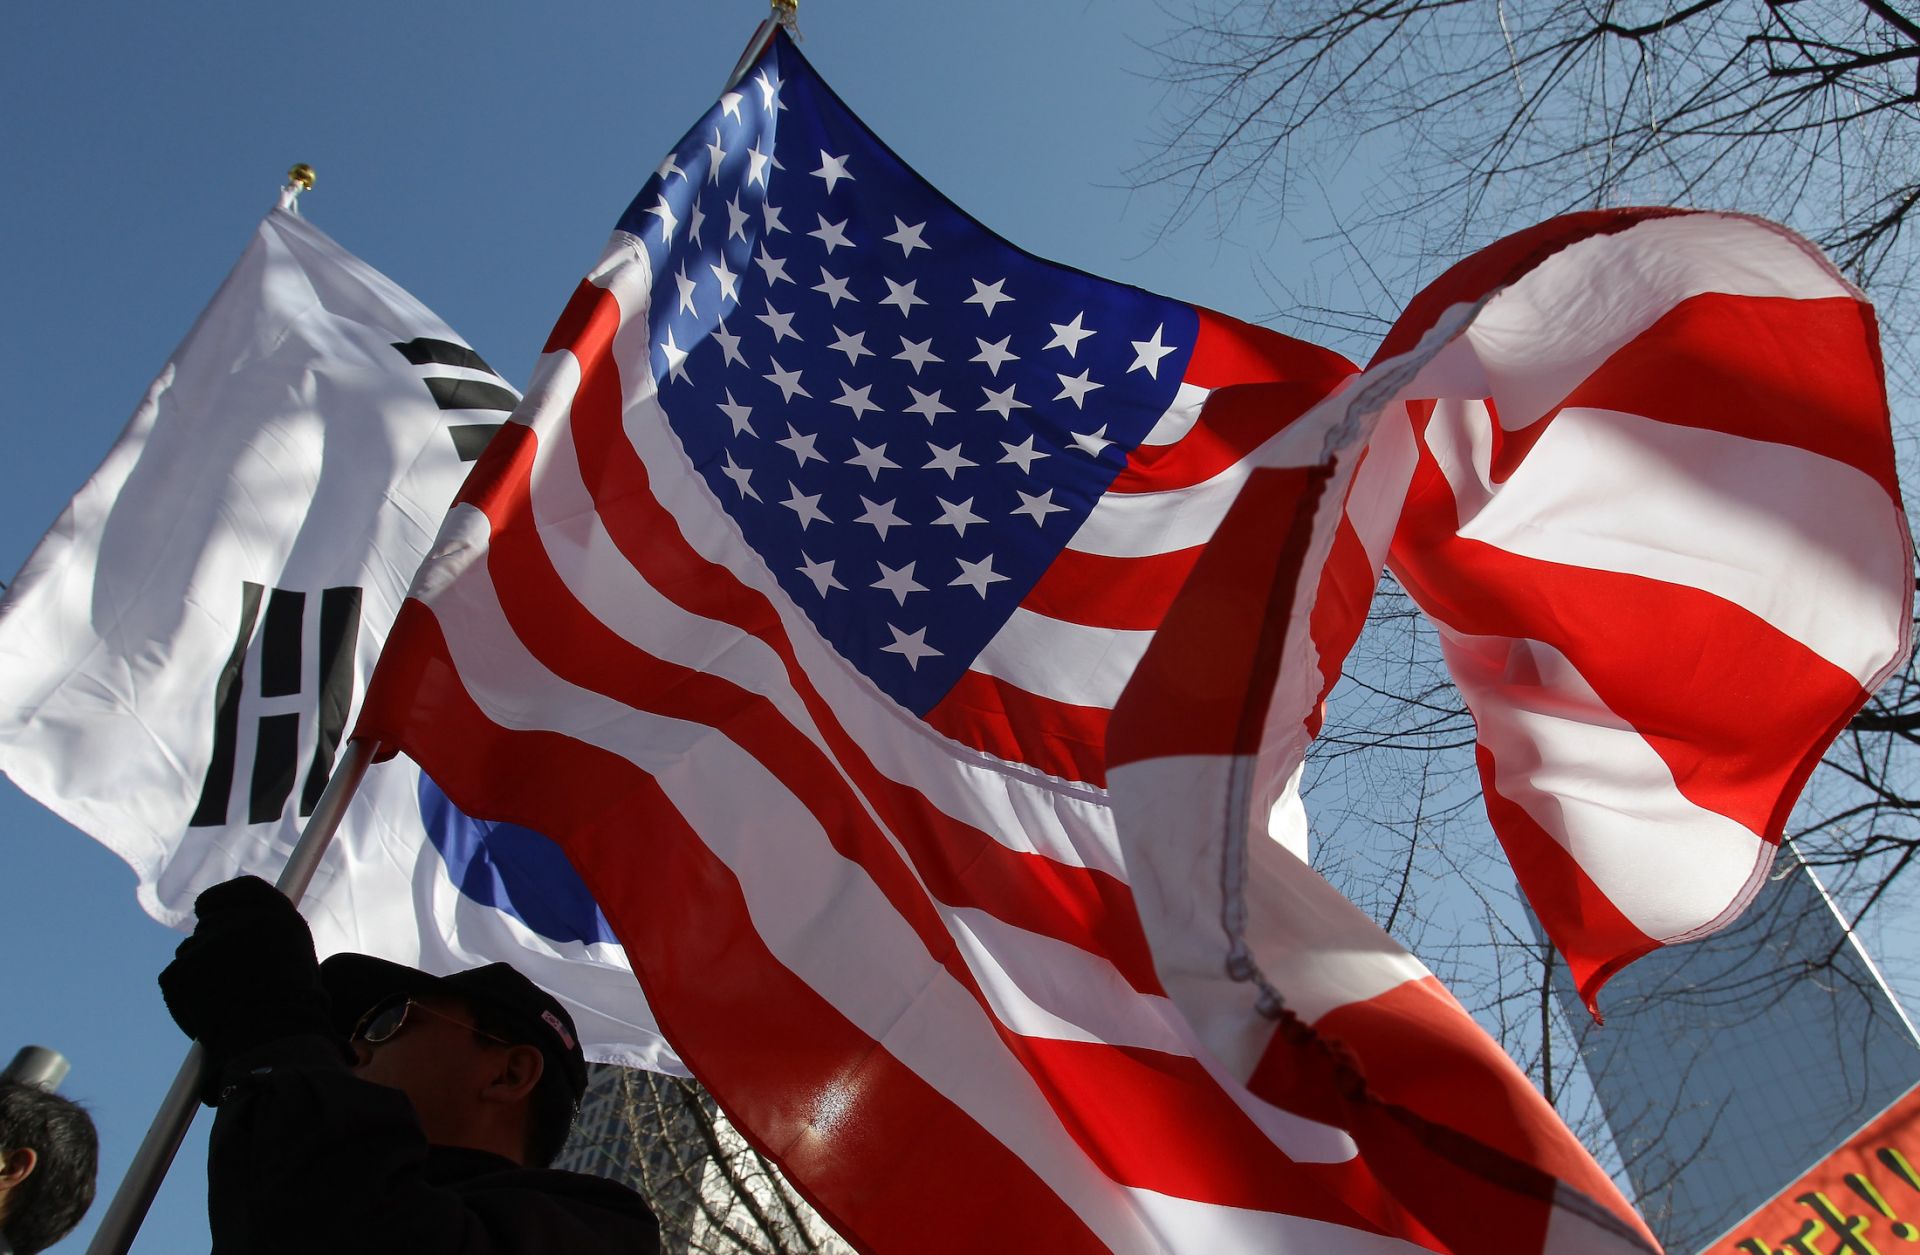 U.S. and South Korean flags are waved March 10, 2015, in Seoul, South Korea.